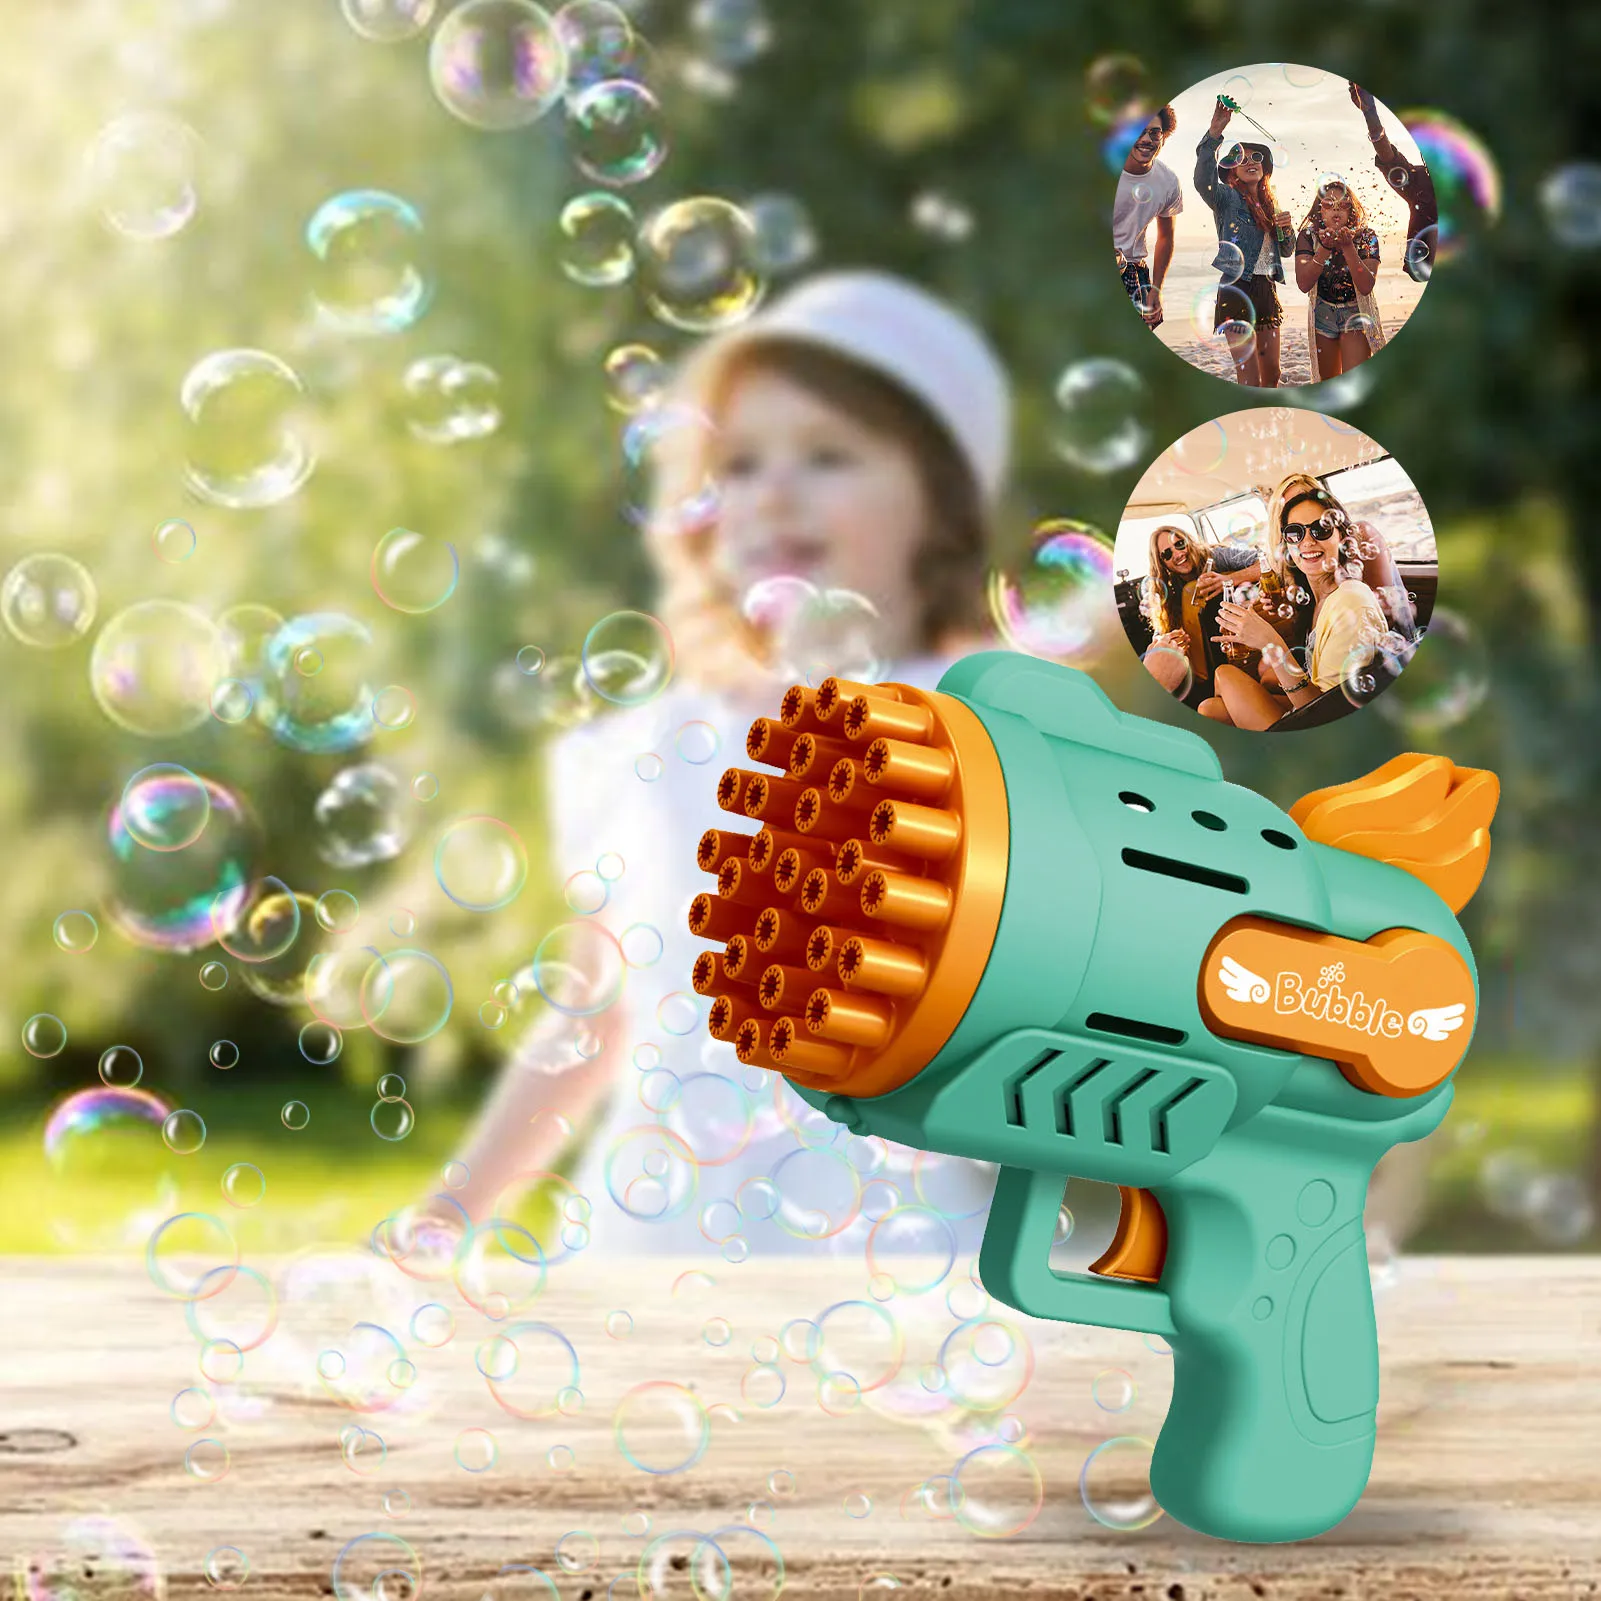 Bubble Gun Rocket 29 Hole Automatic Soap Bubbles Machine Outdoor Toy for Boys Birthday Gifts Wedding Party Children Summer Gift fireworks bubble machine with flash lights sounds for kids outdoor toys pro party festival celebrate bubble maker machines